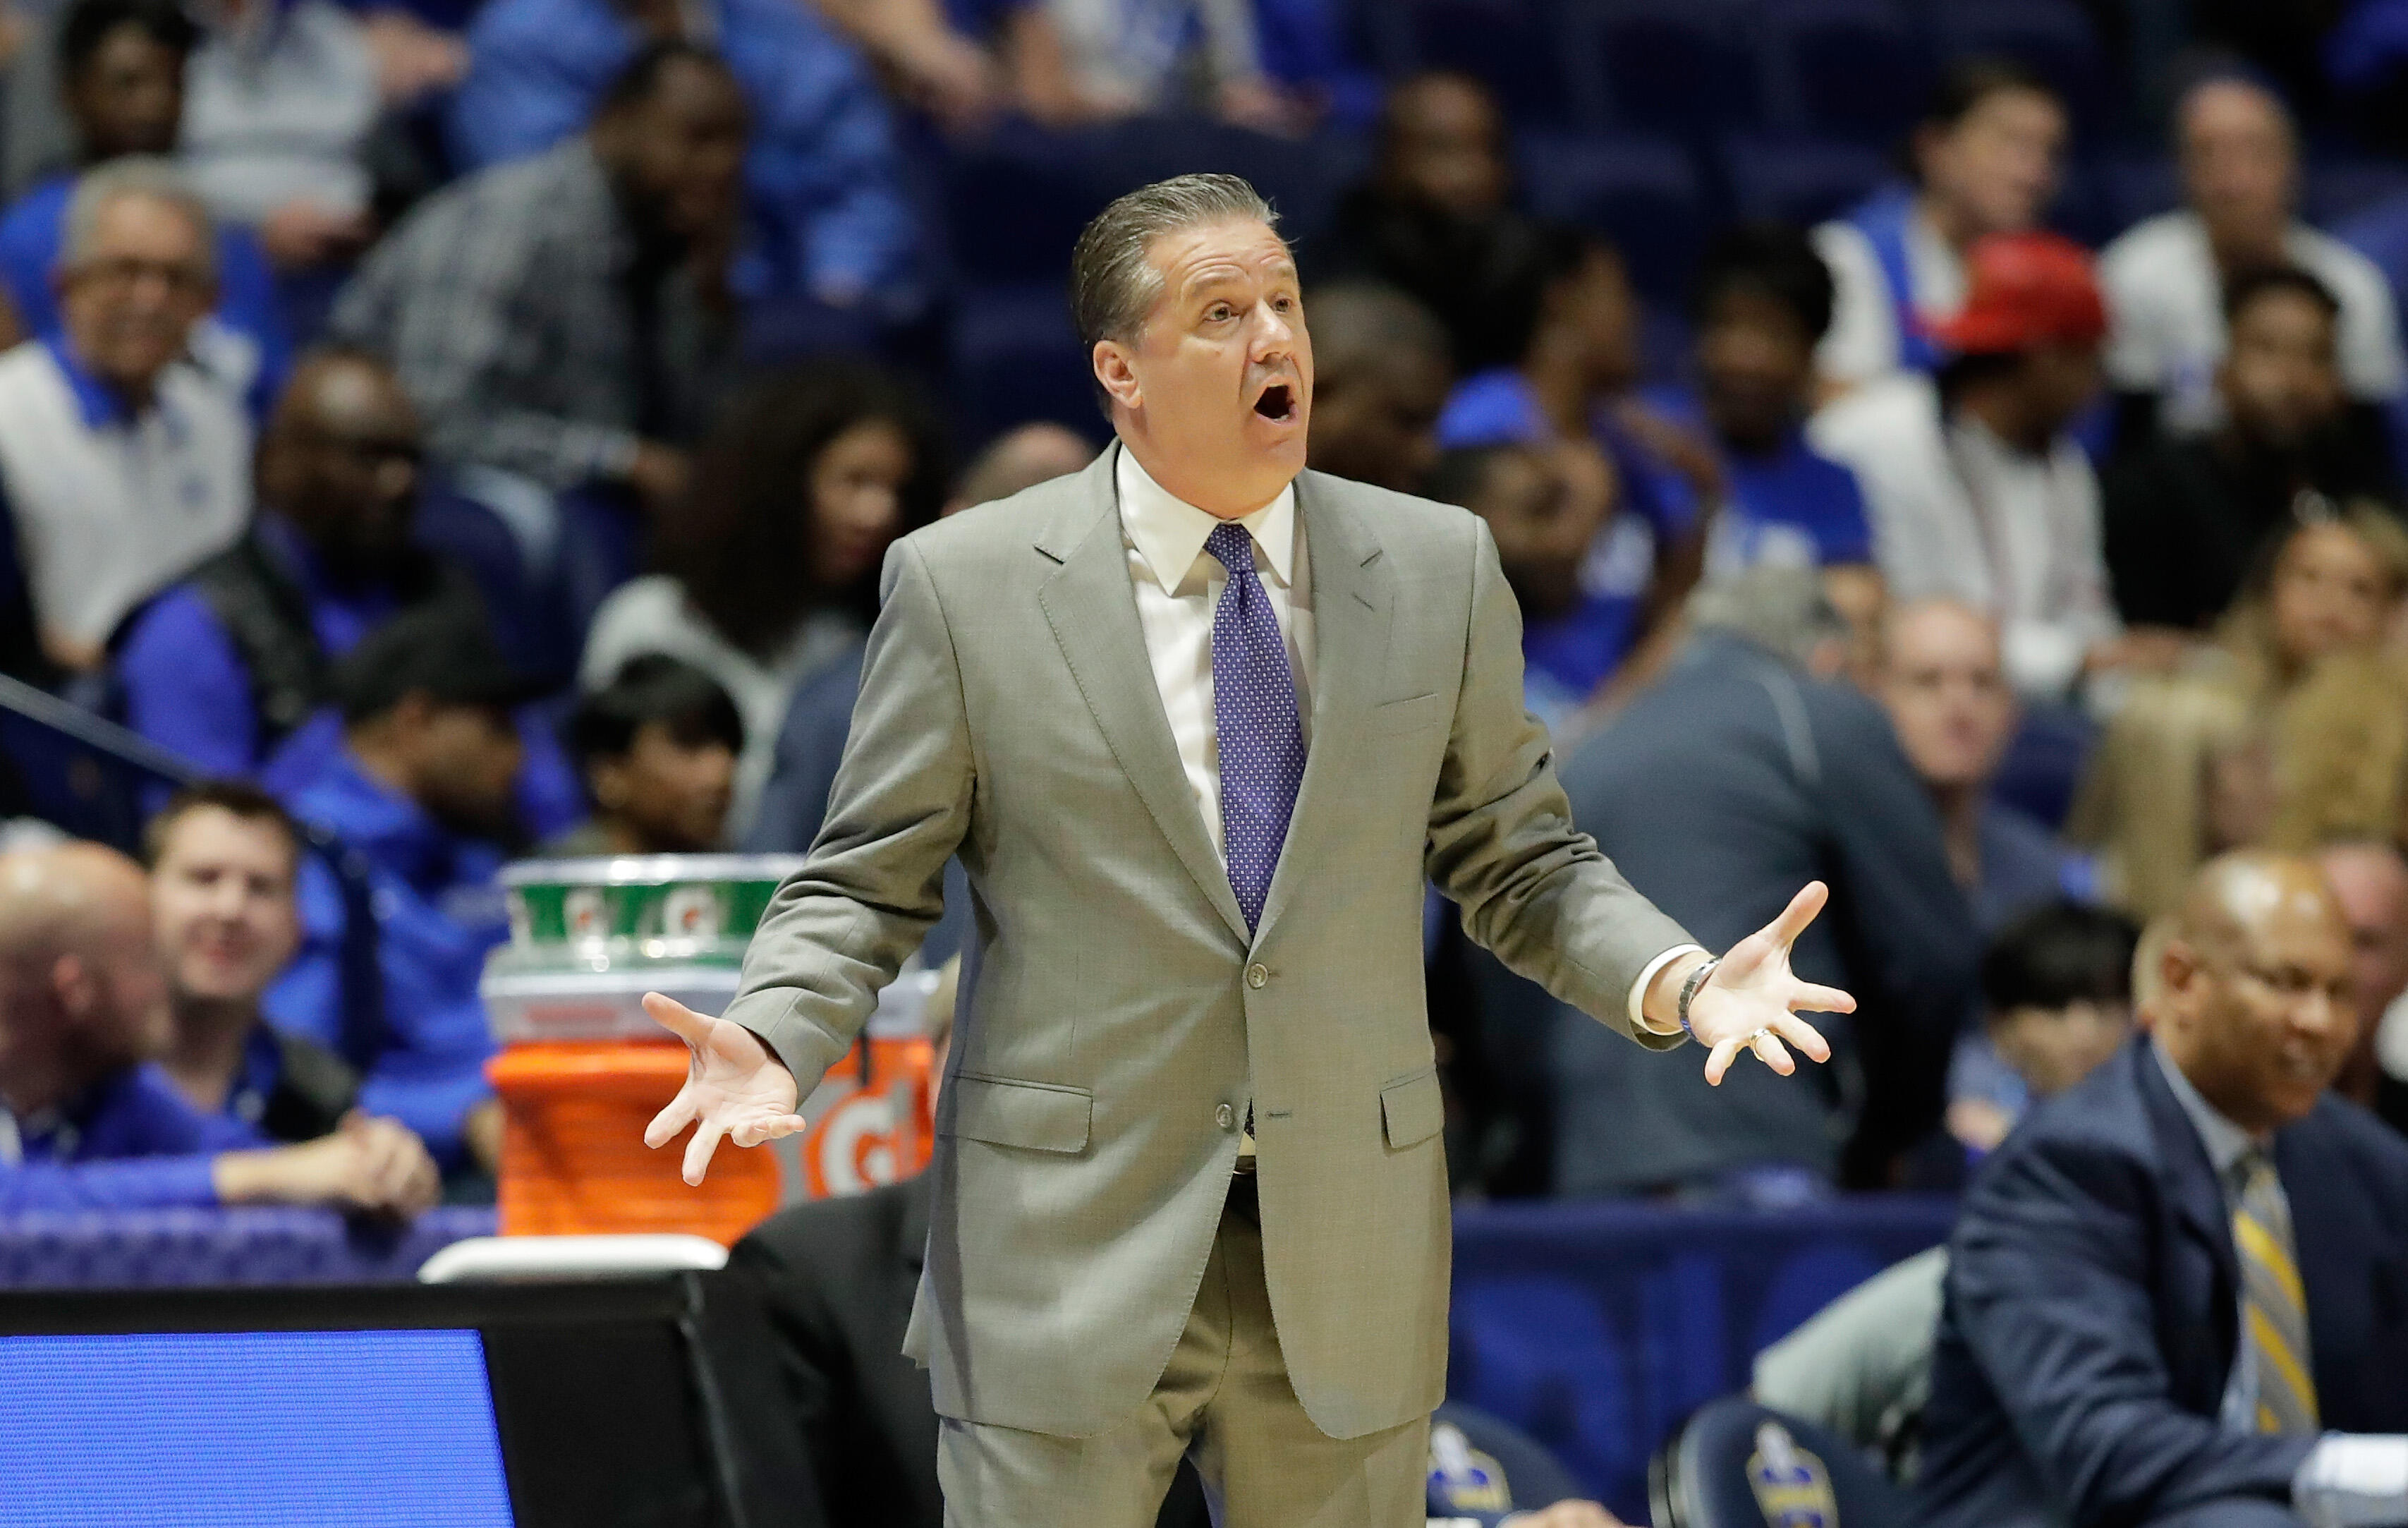 NASHVILLE, TN - MARCH 10:  John Calipari the head coach of the Kentucky Wildcats gives instructions to his team against the Georgia Bulldogs during the quarterfinals of the SEC Basketball Tournament at Bridgestone Arena on March 10, 2017 in Nashville, Ten